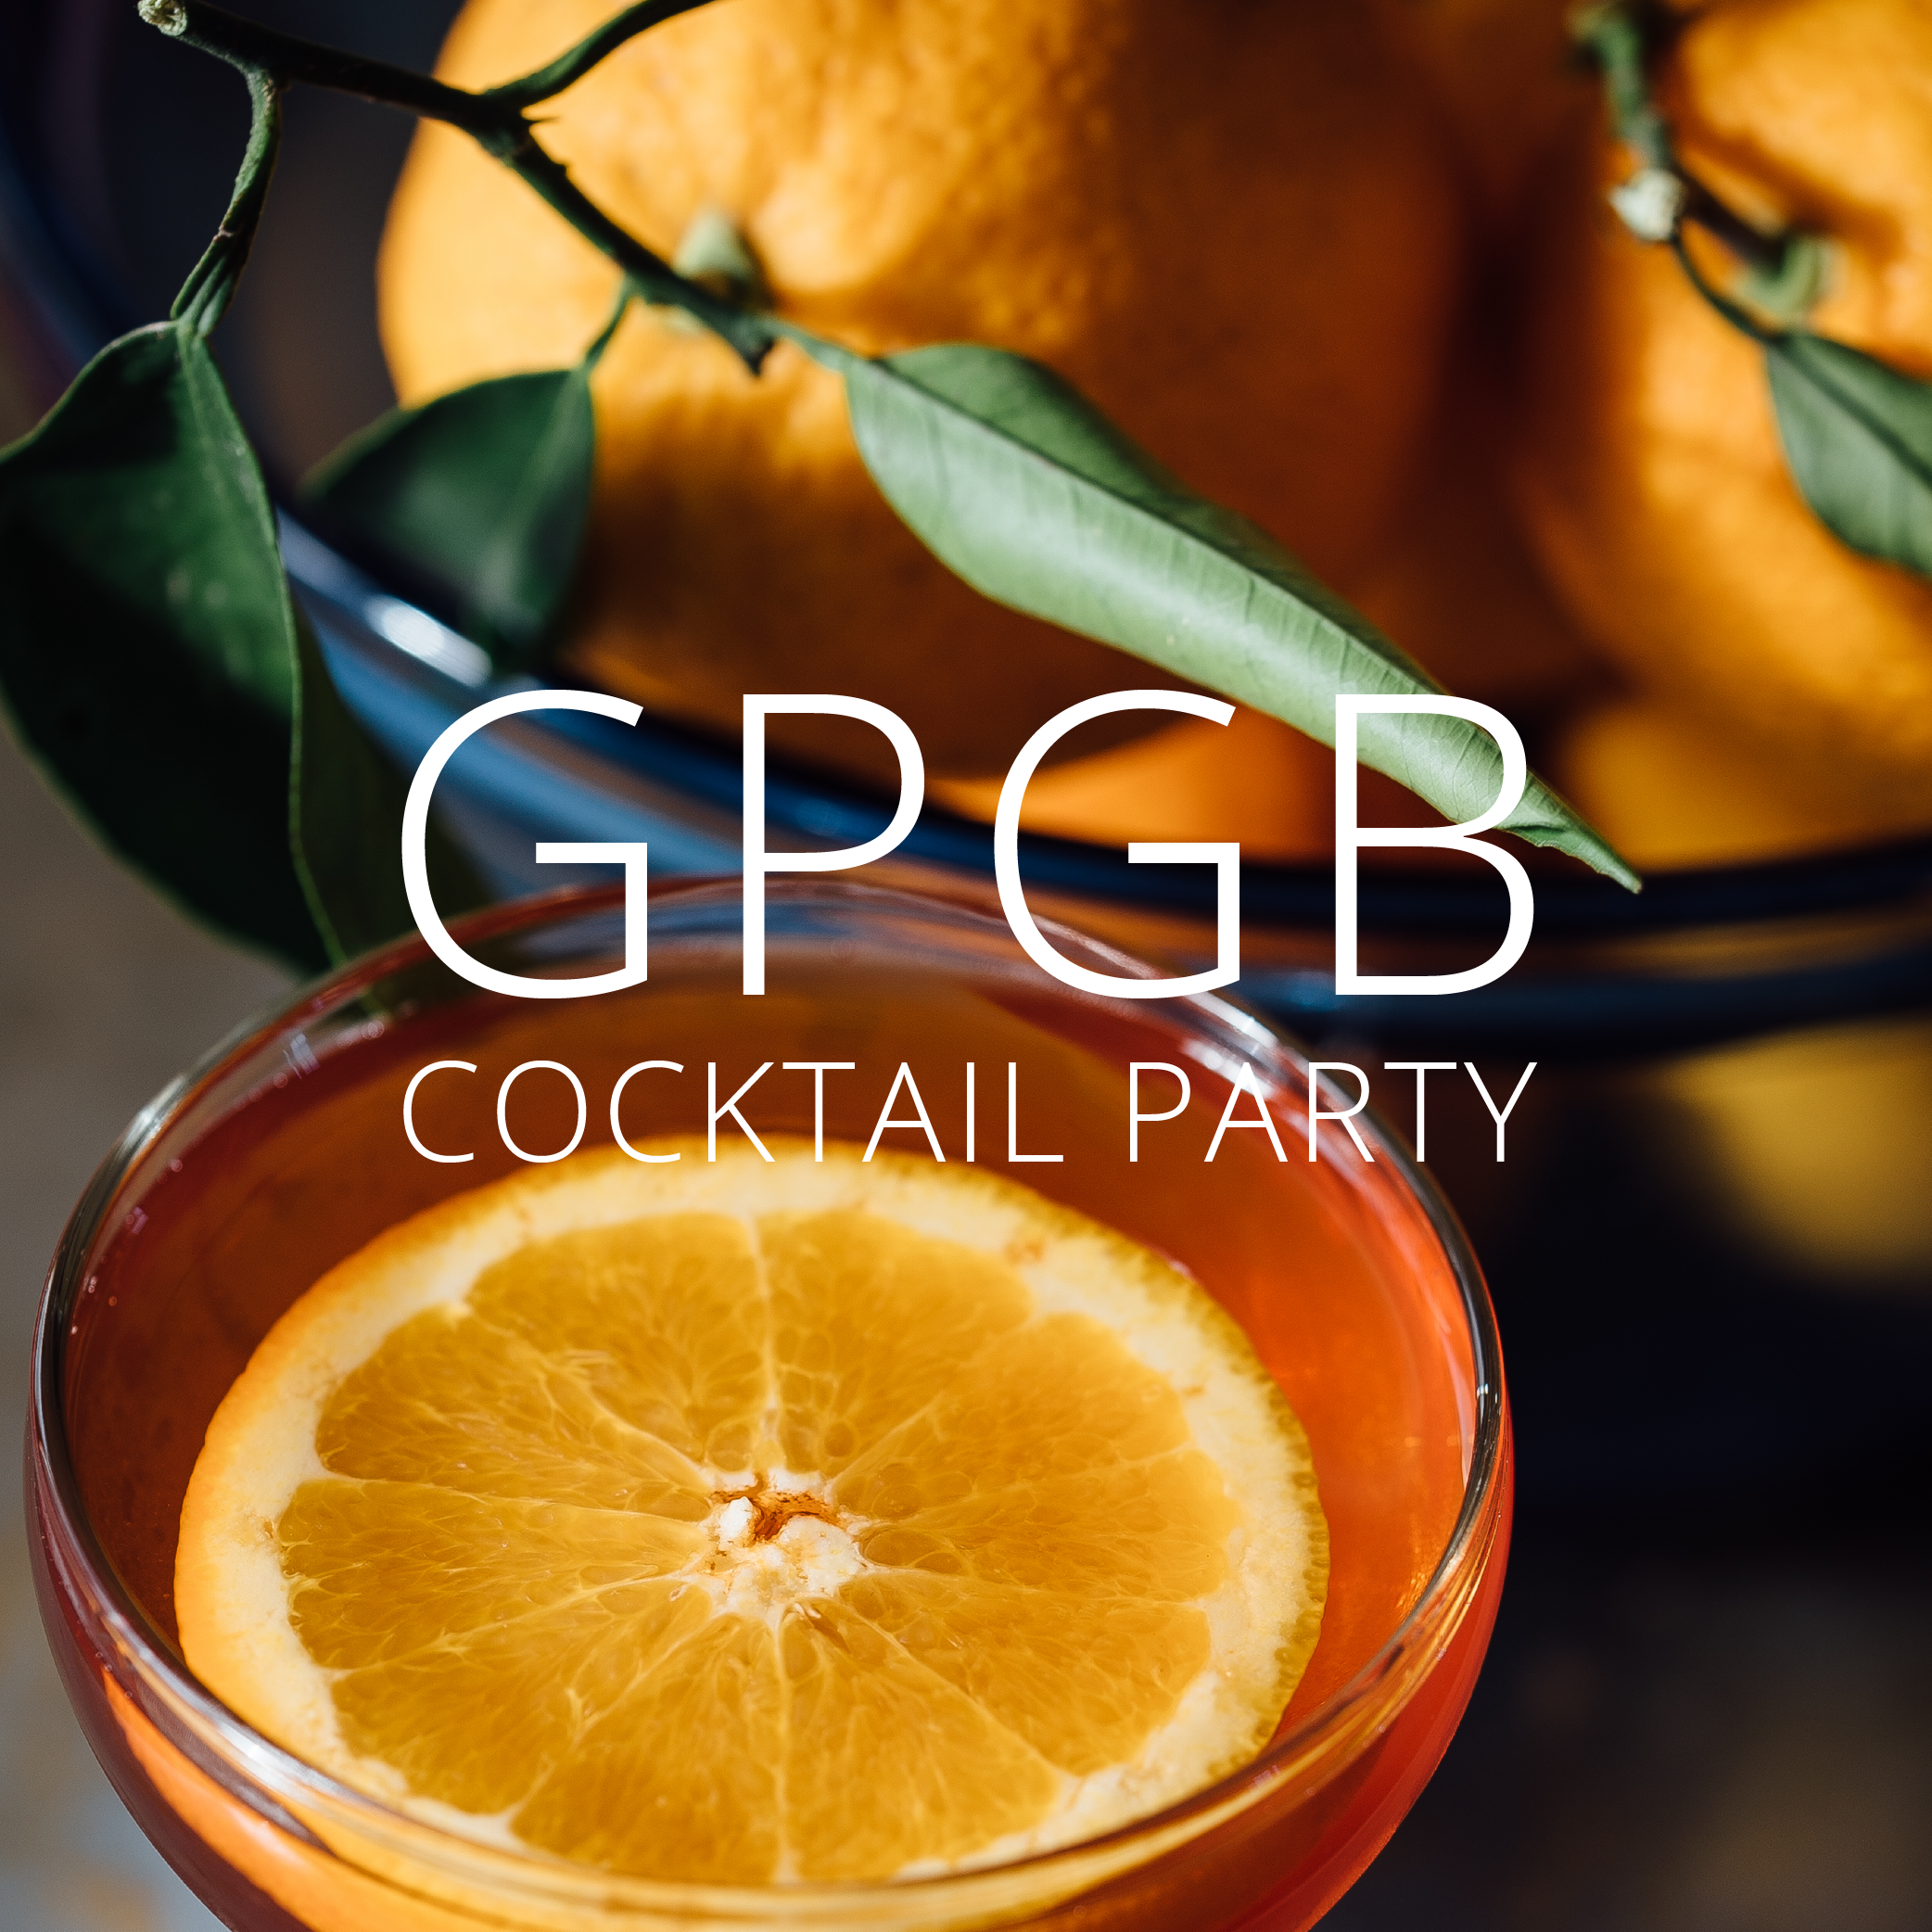 GPGB Cocktail Party